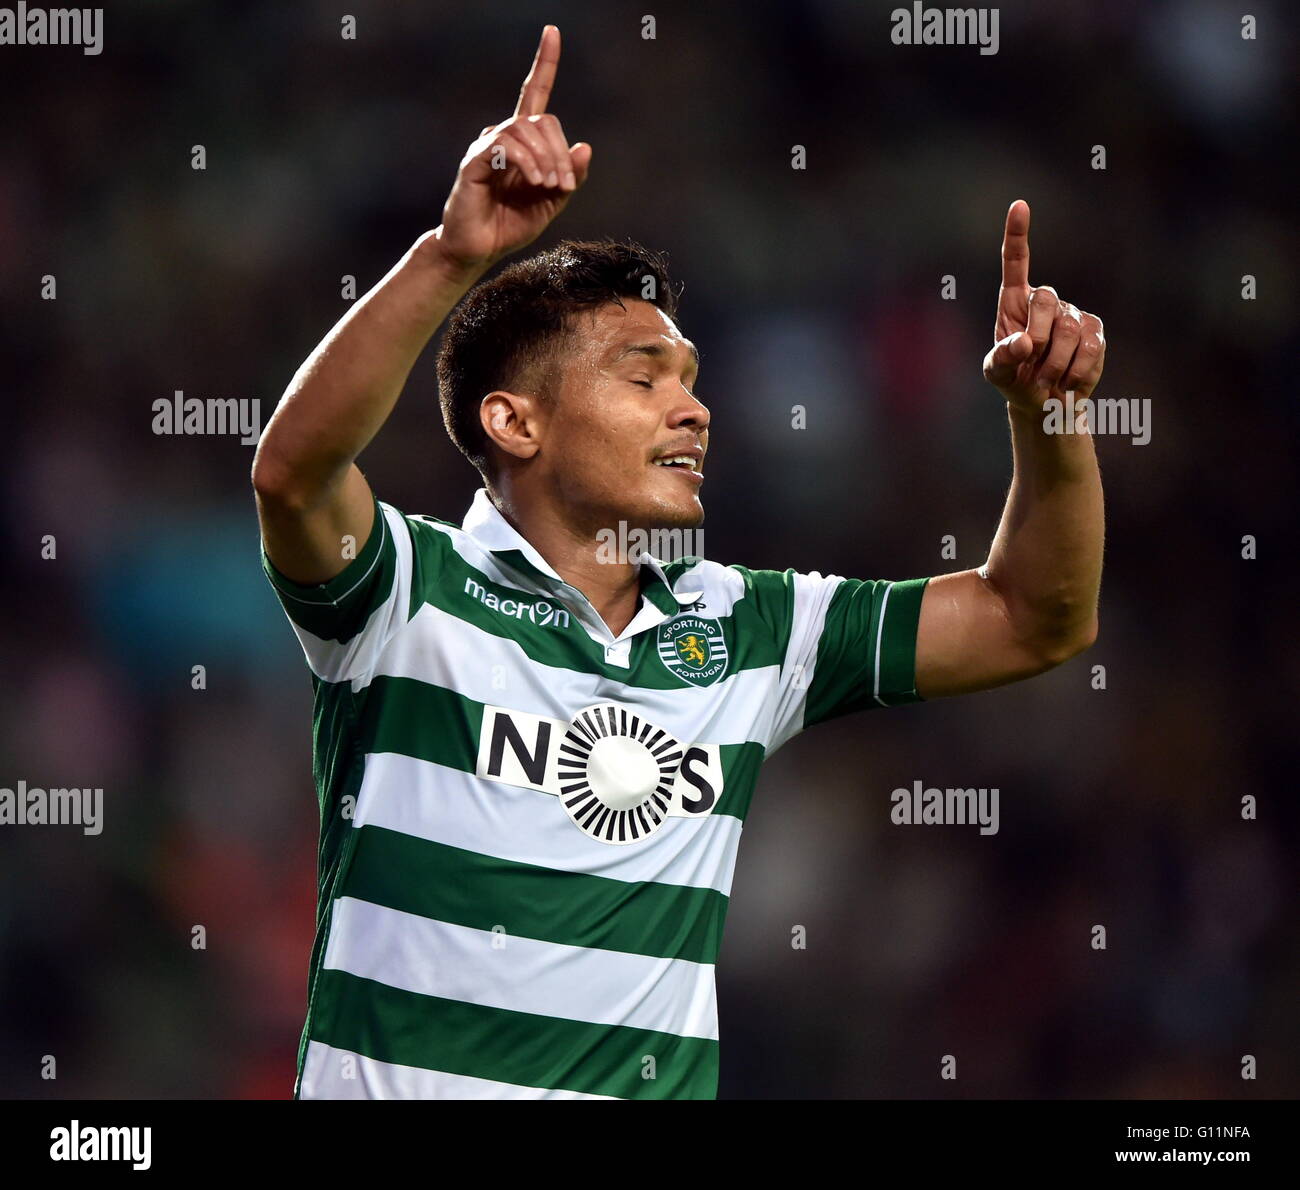 Lisbon, Portugal. 7th May, 2016. Sporting CP's Teofilo Gutierrez celebrates after scoring during the Portuguese League soccer match against Vitoria FC in Lisbon, Portugal, May 7, 2016. Sporting CP won 5-0. © Zhang Liyun/Xinhua/Alamy Live News Stock Photo